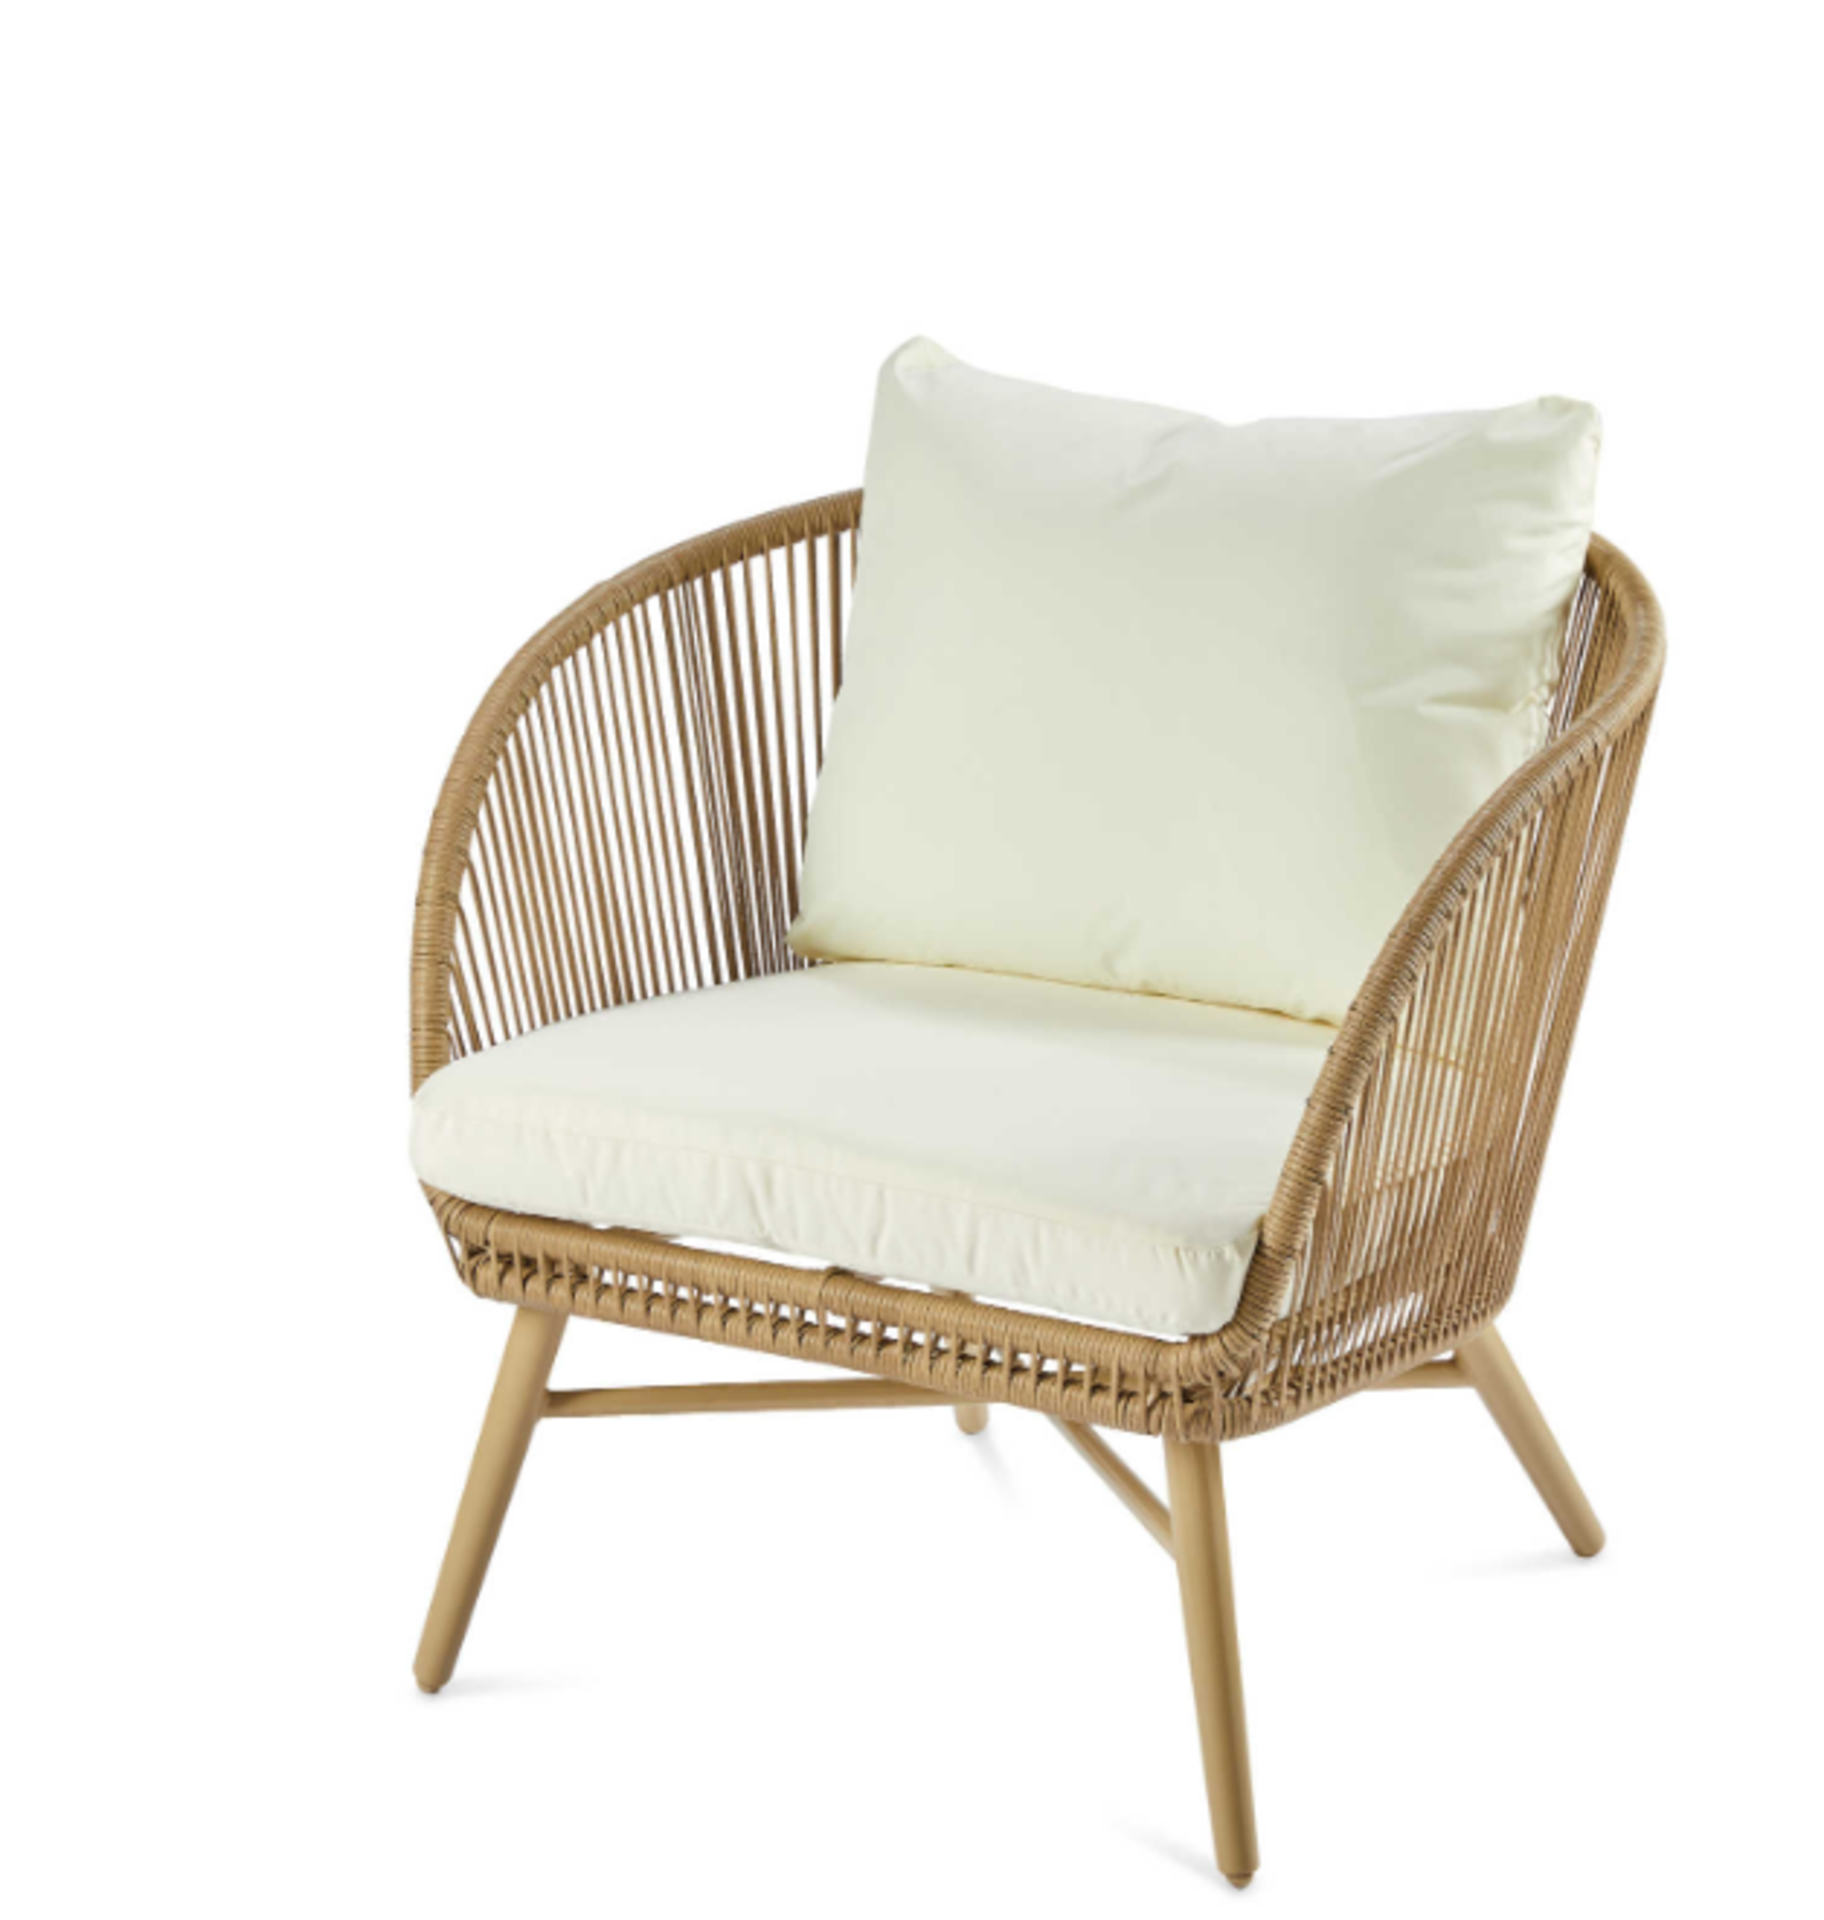 Rope Effect Furniture Set. Enjoy those lazy days in the garden with this comfortable and stylish - Image 5 of 5